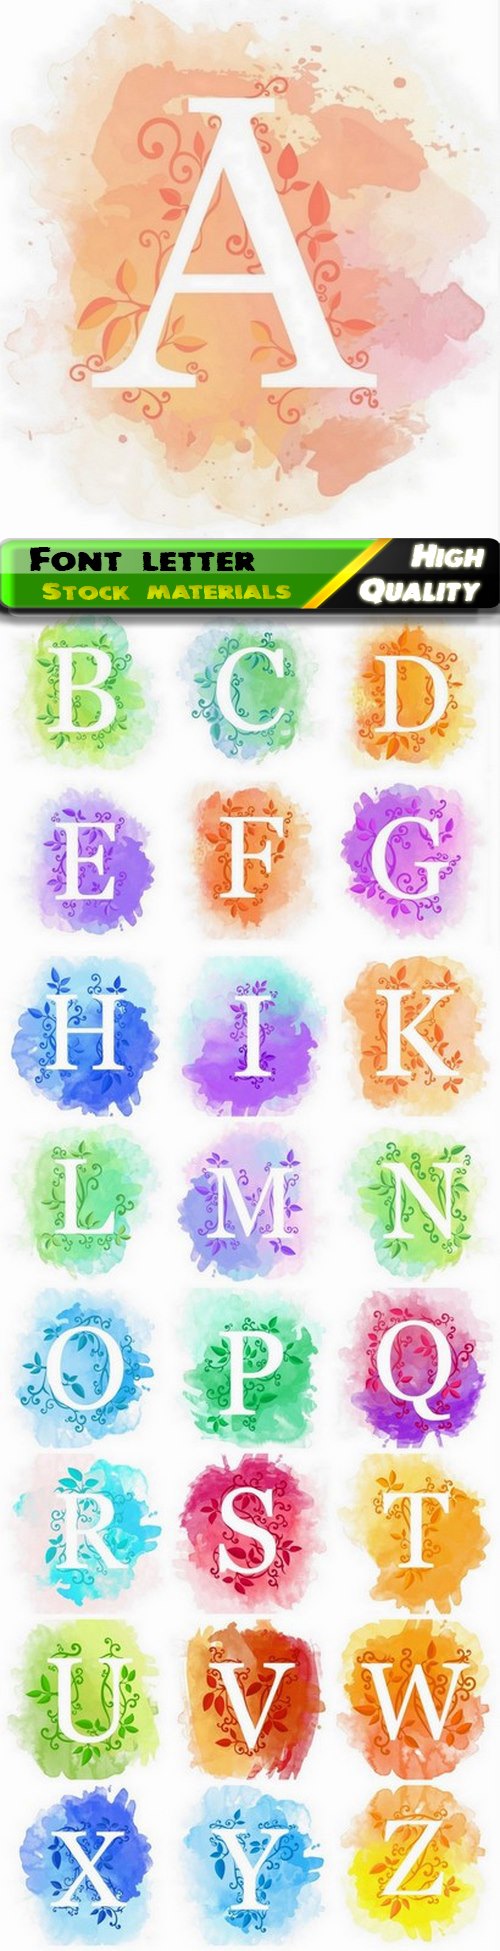 Font and alphabet letter on floral watercolor background 25 HQ Jpg